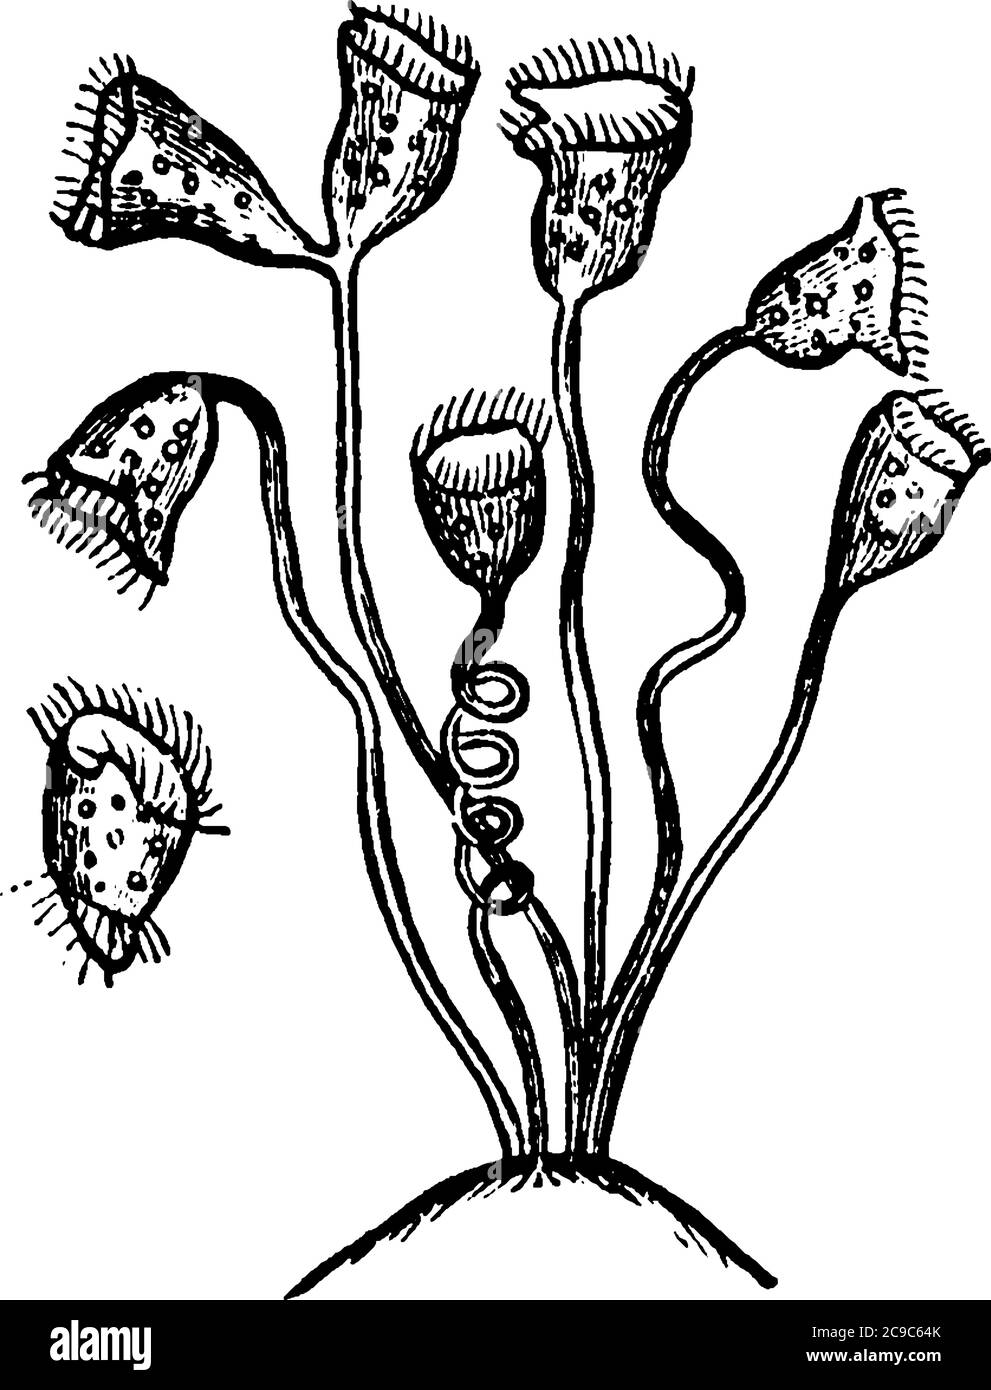 Vorticella is a genus of bell-shaped ciliates that have stalks to attach themselves to substrates, attached to the stems of aquatic plants, vintage li Stock Vector